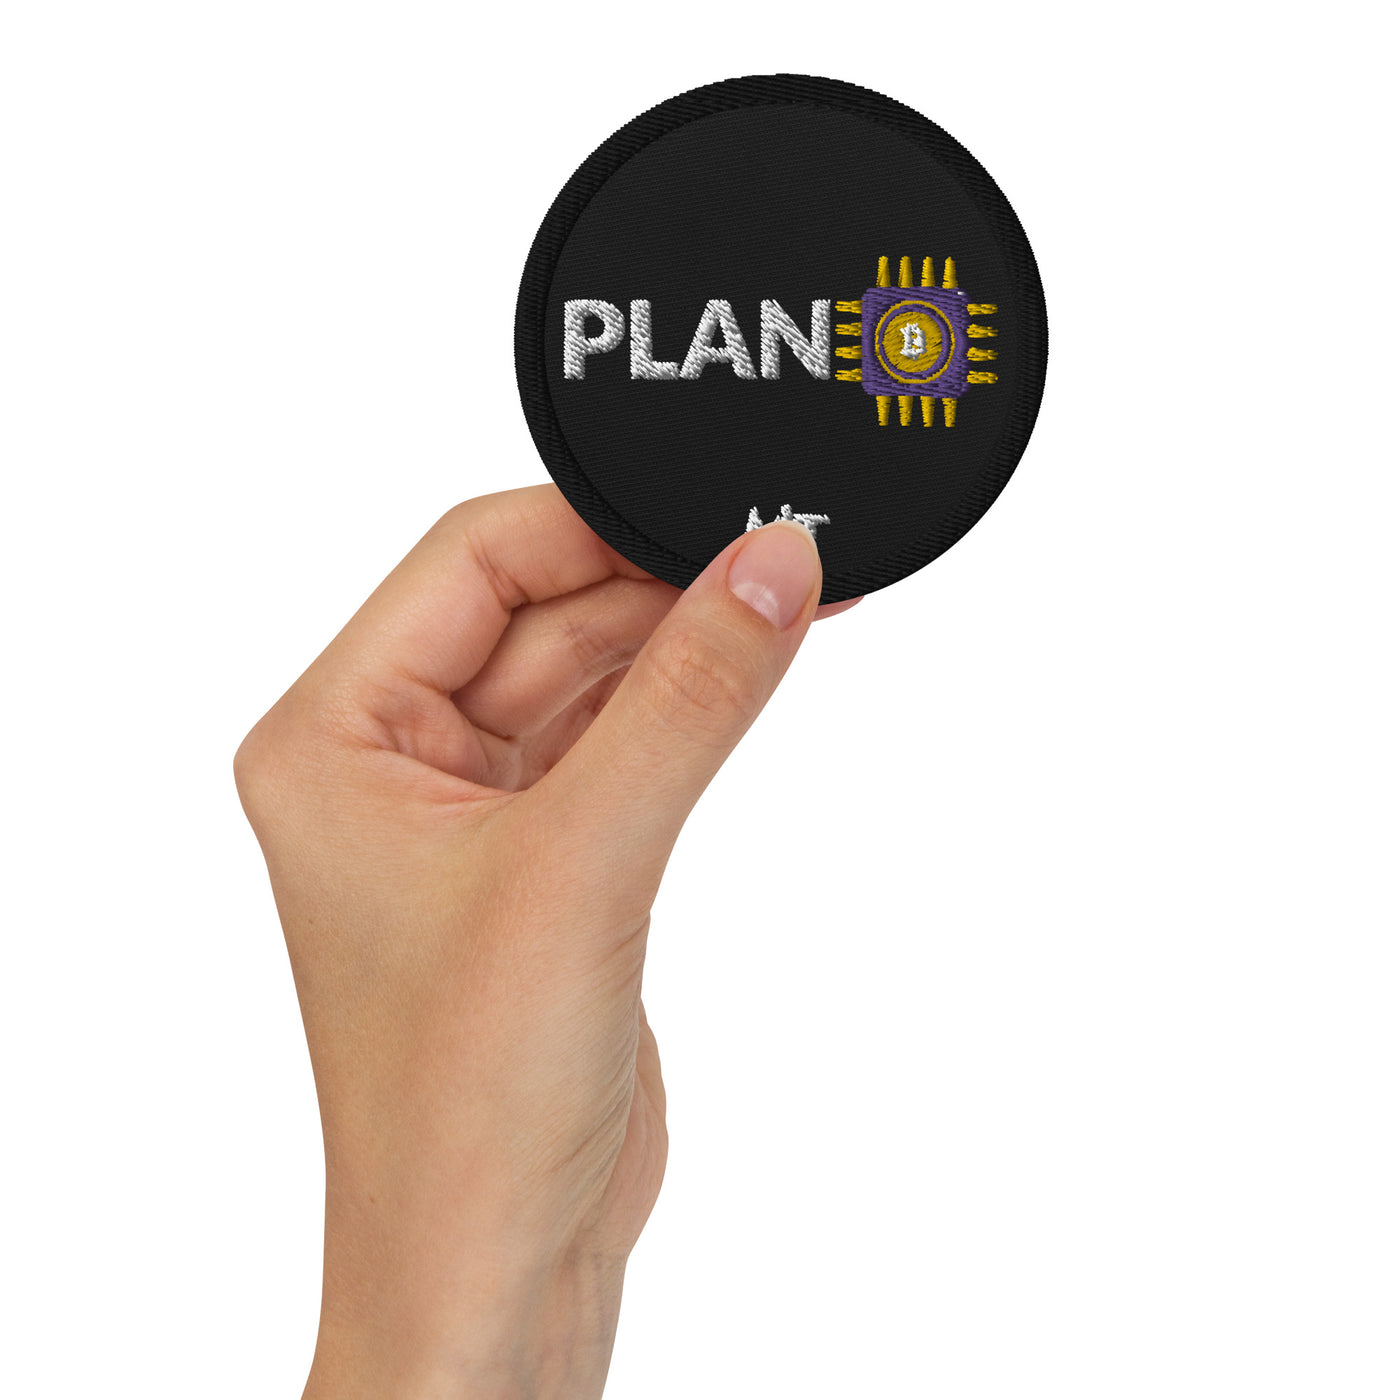 Plan B v3 - Embroidered patches